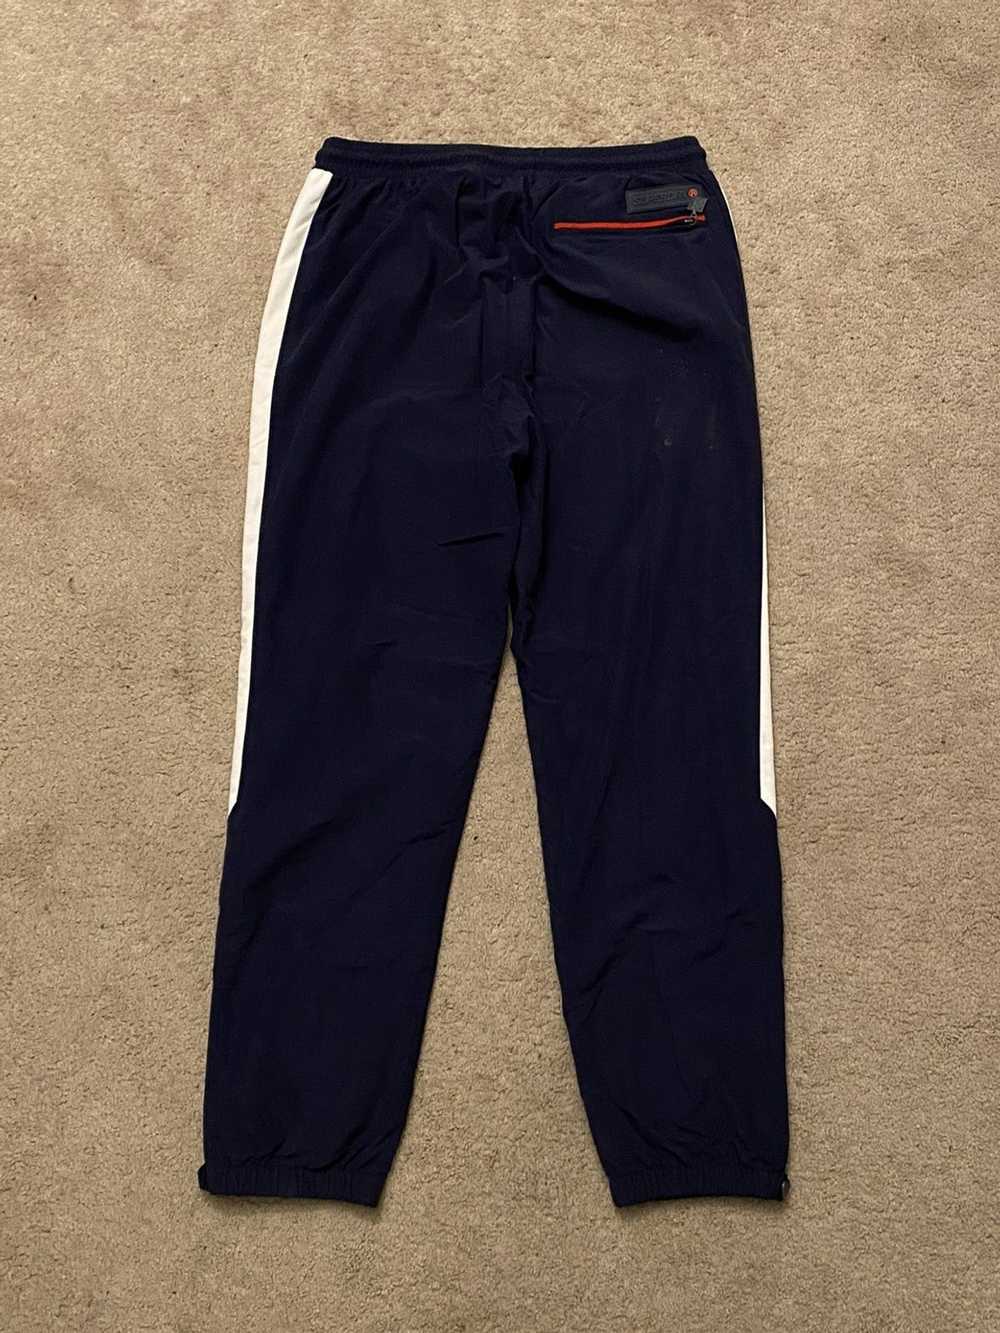 Superdry Superdry TrackPants - image 2